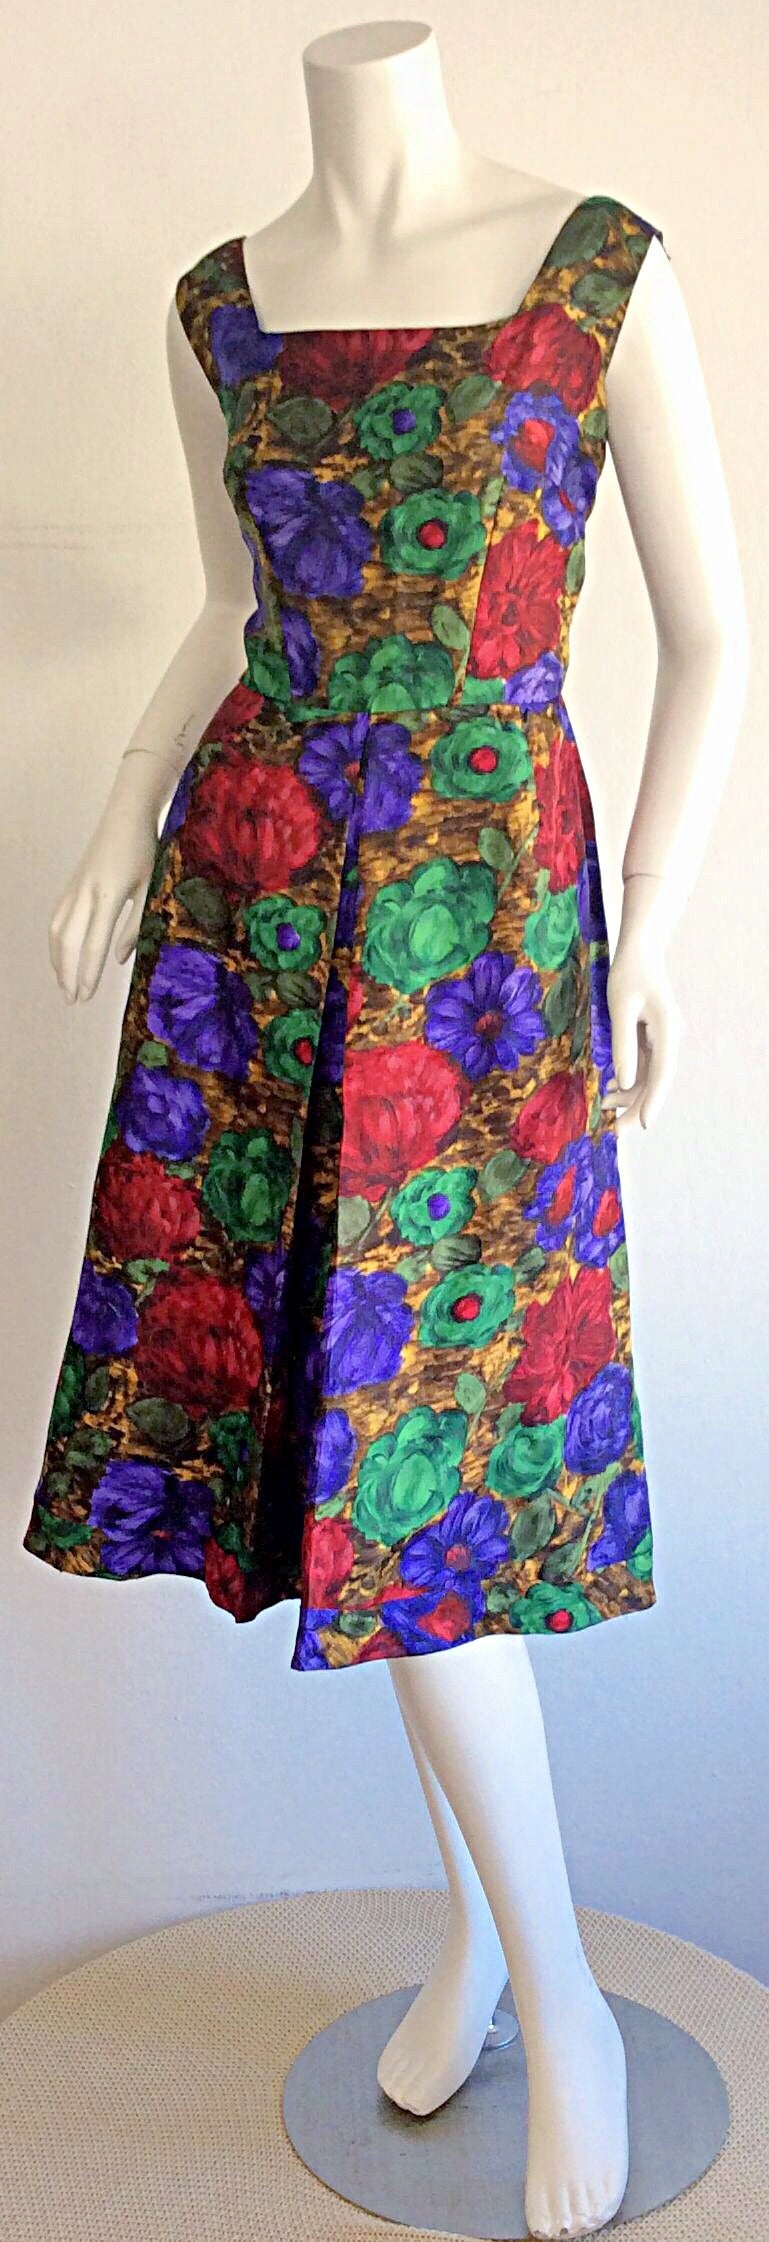 Stunning 1950s Adele Ross Silk Floral Watercolor Belted Dress For Sale ...